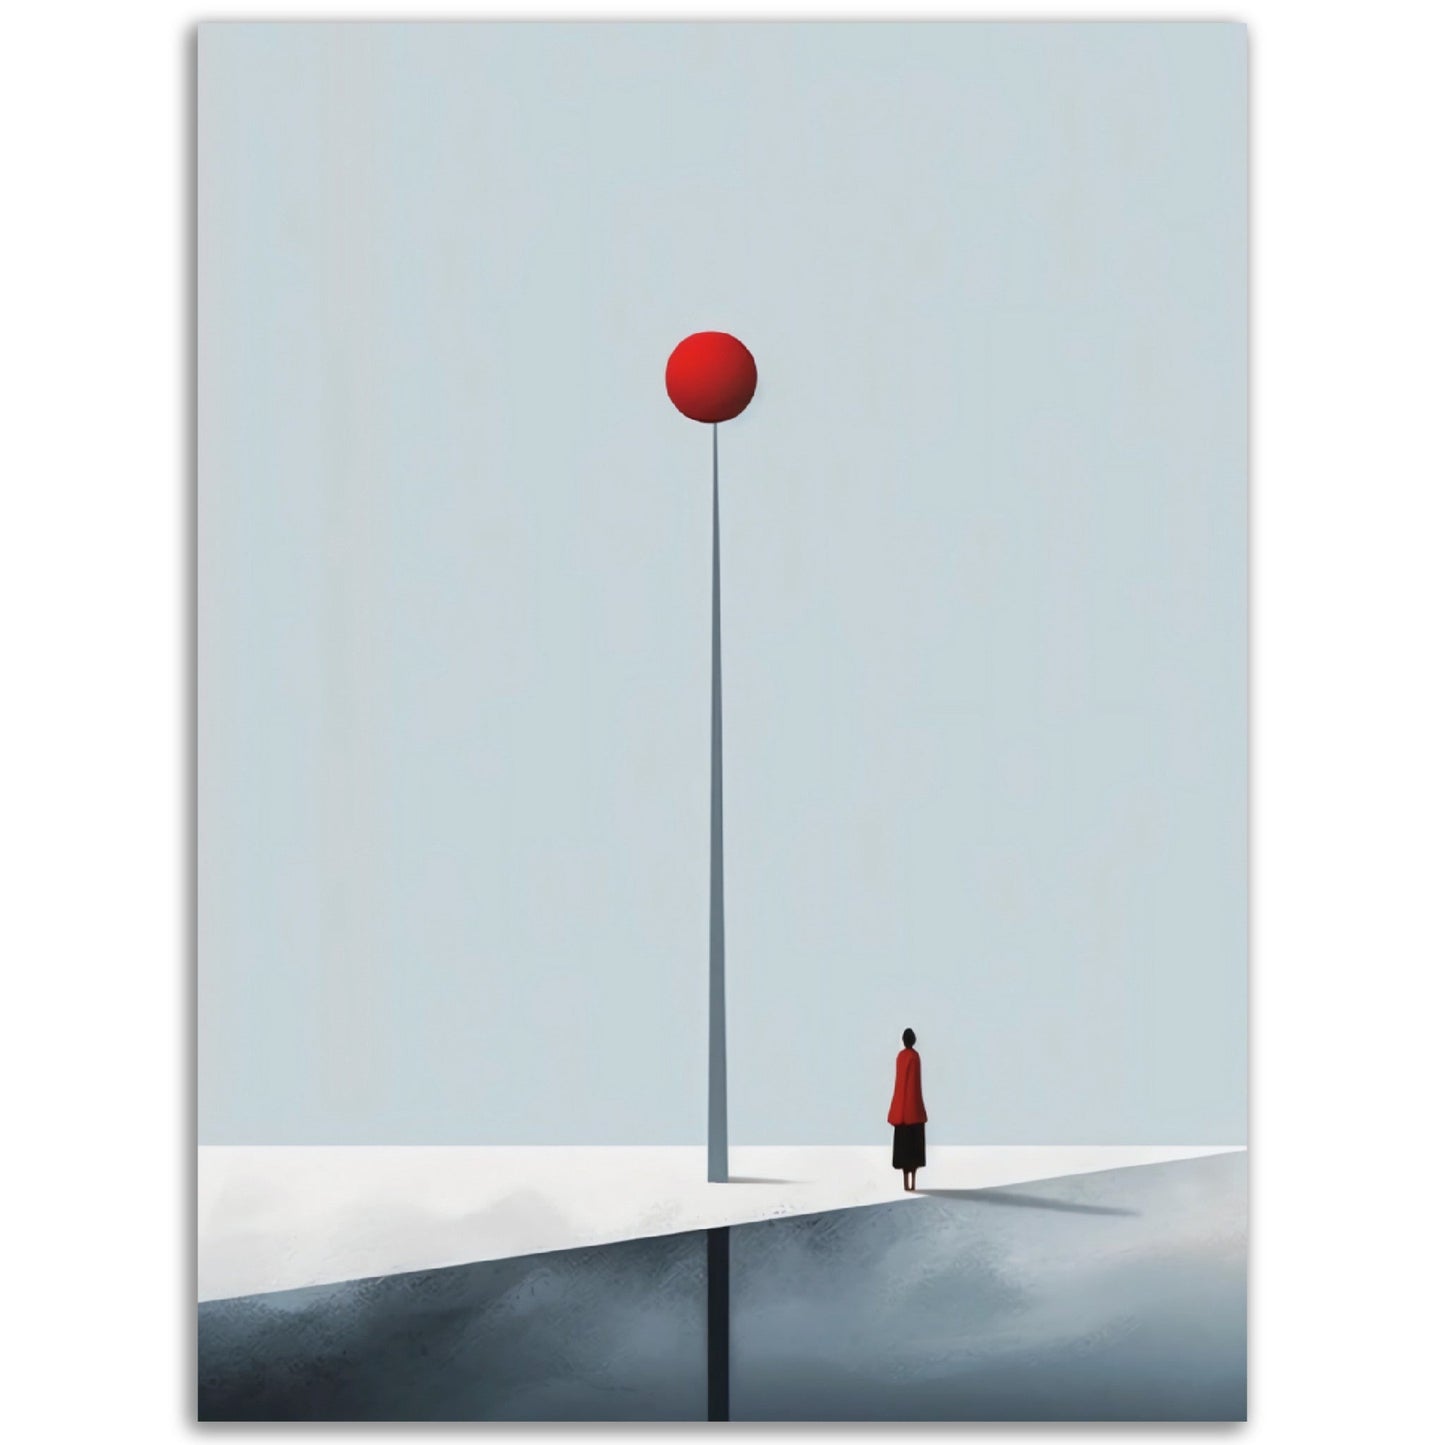 A Pop Art colored Matters of A Moment depicting a person strolling down a street with a striking red ball.